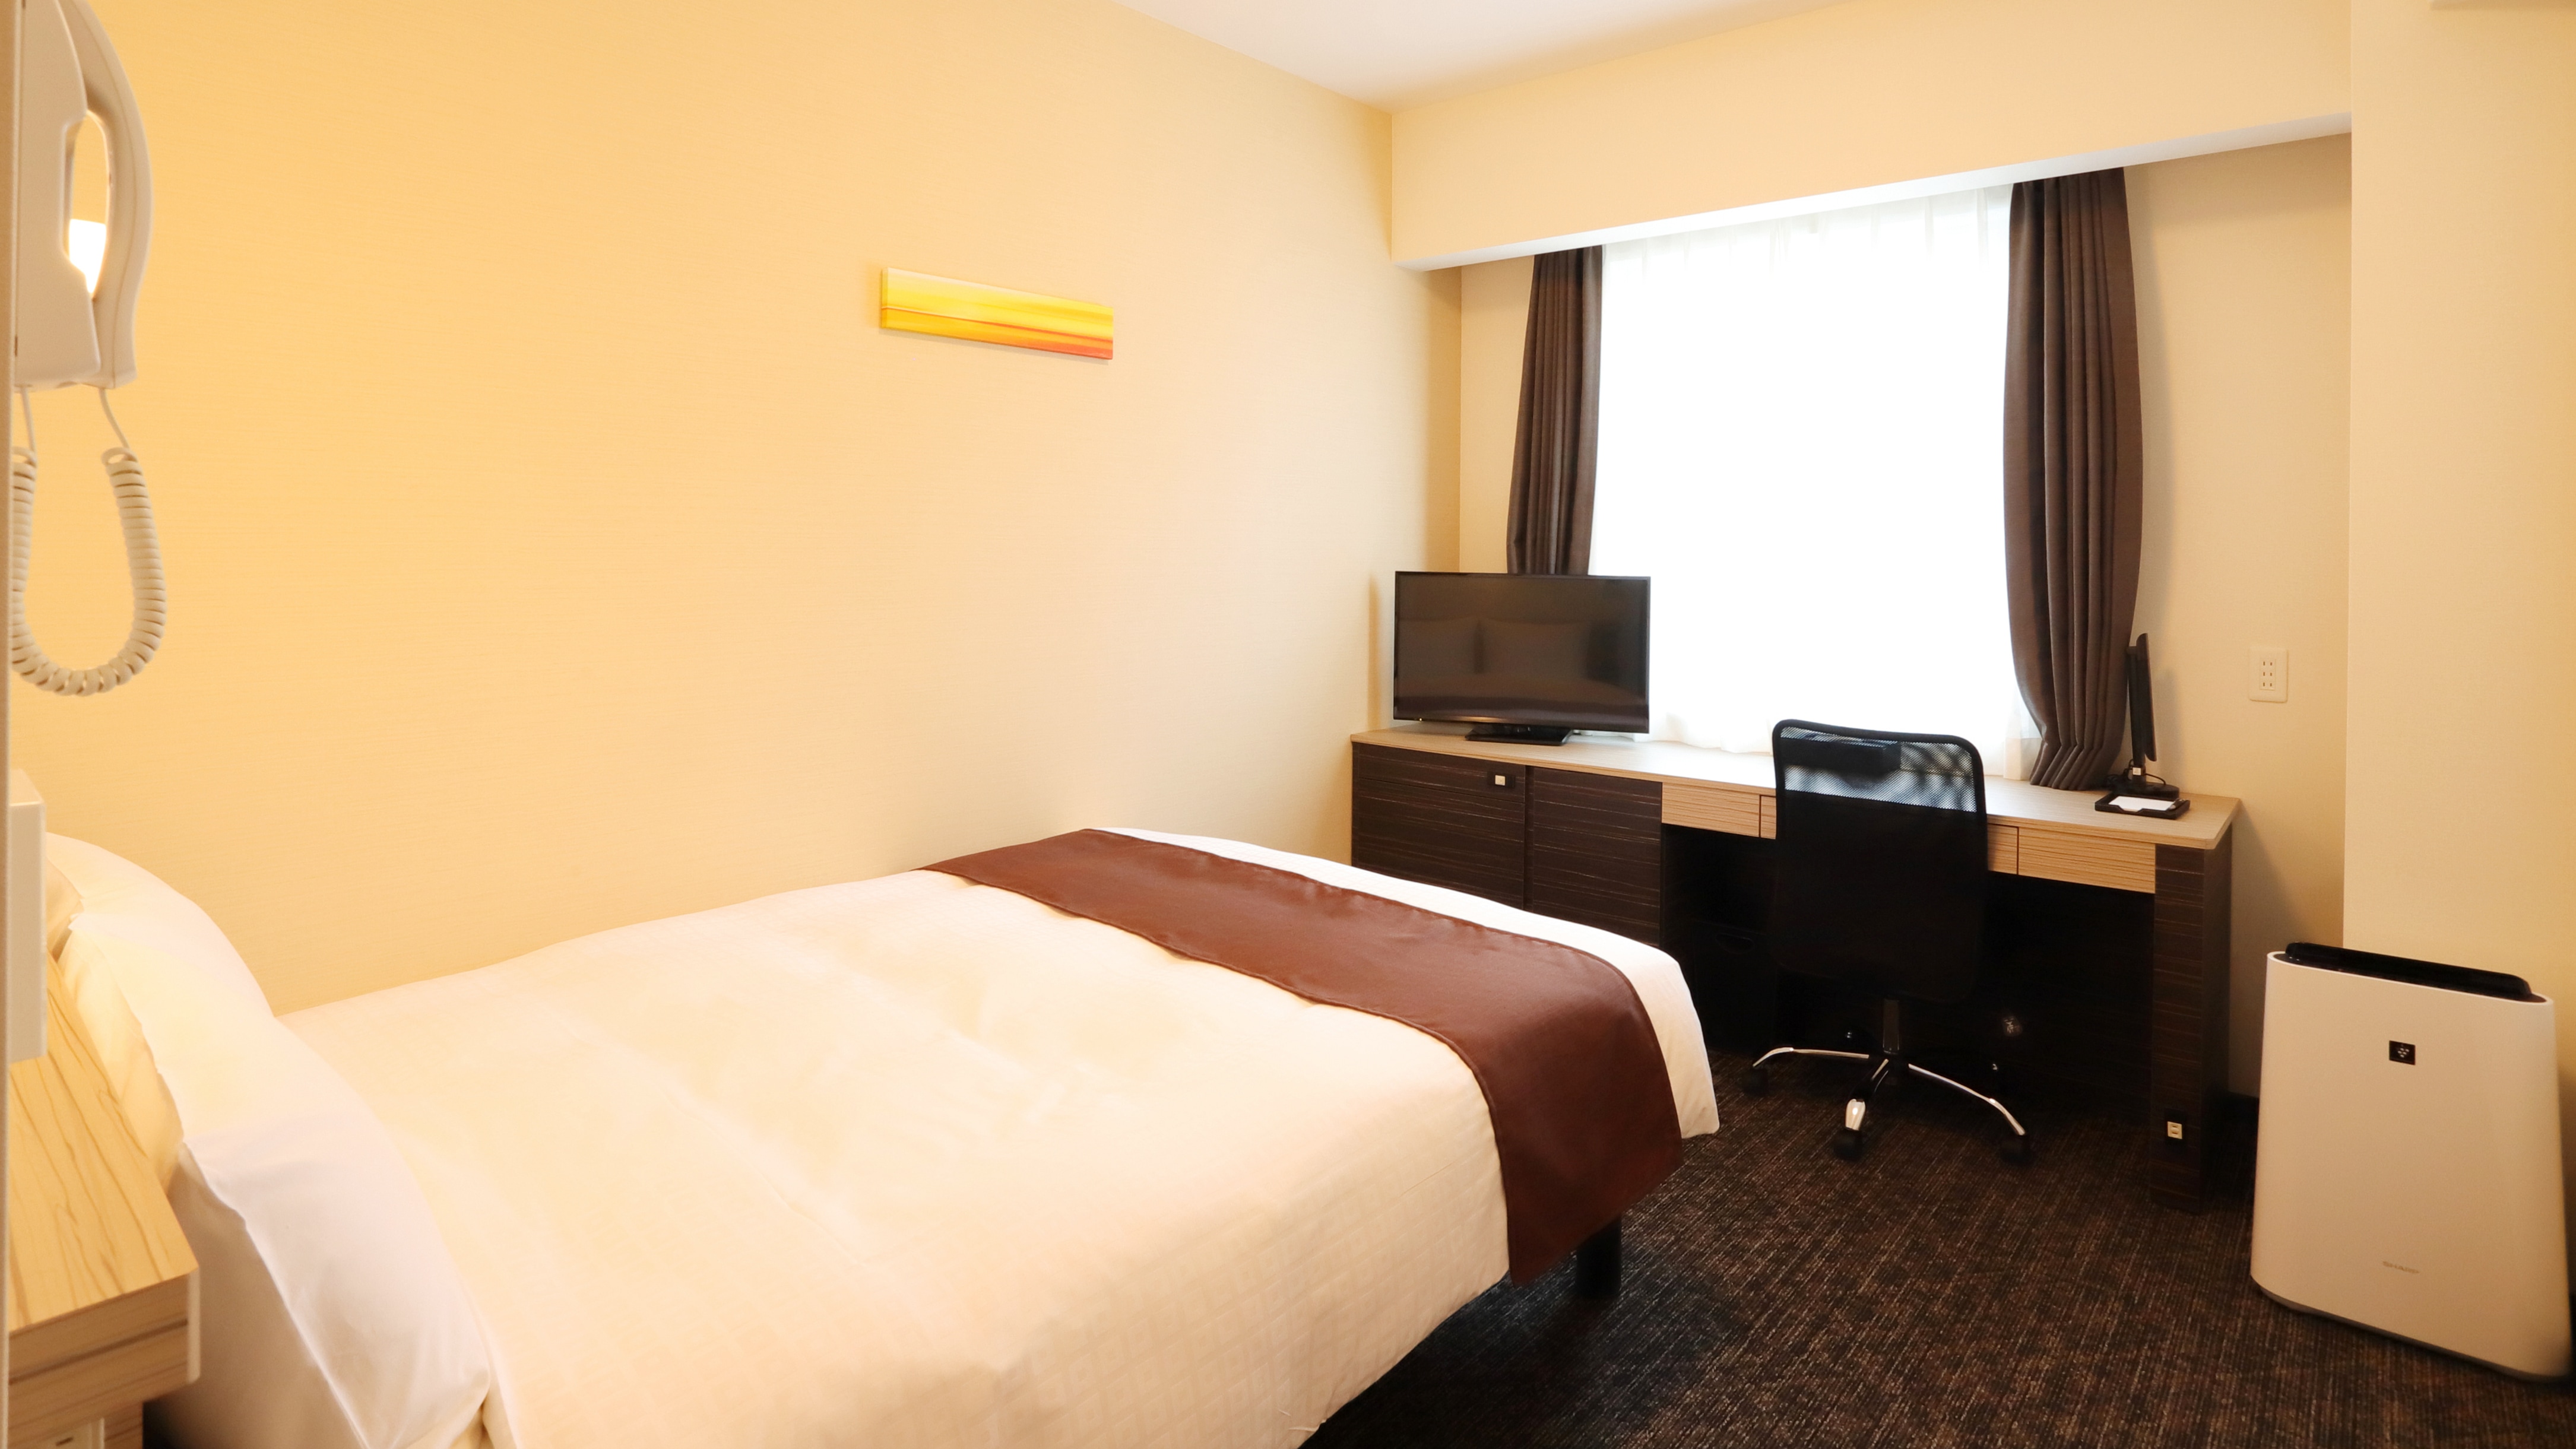 Standard double room (approx. 15㎡ to 17㎡)